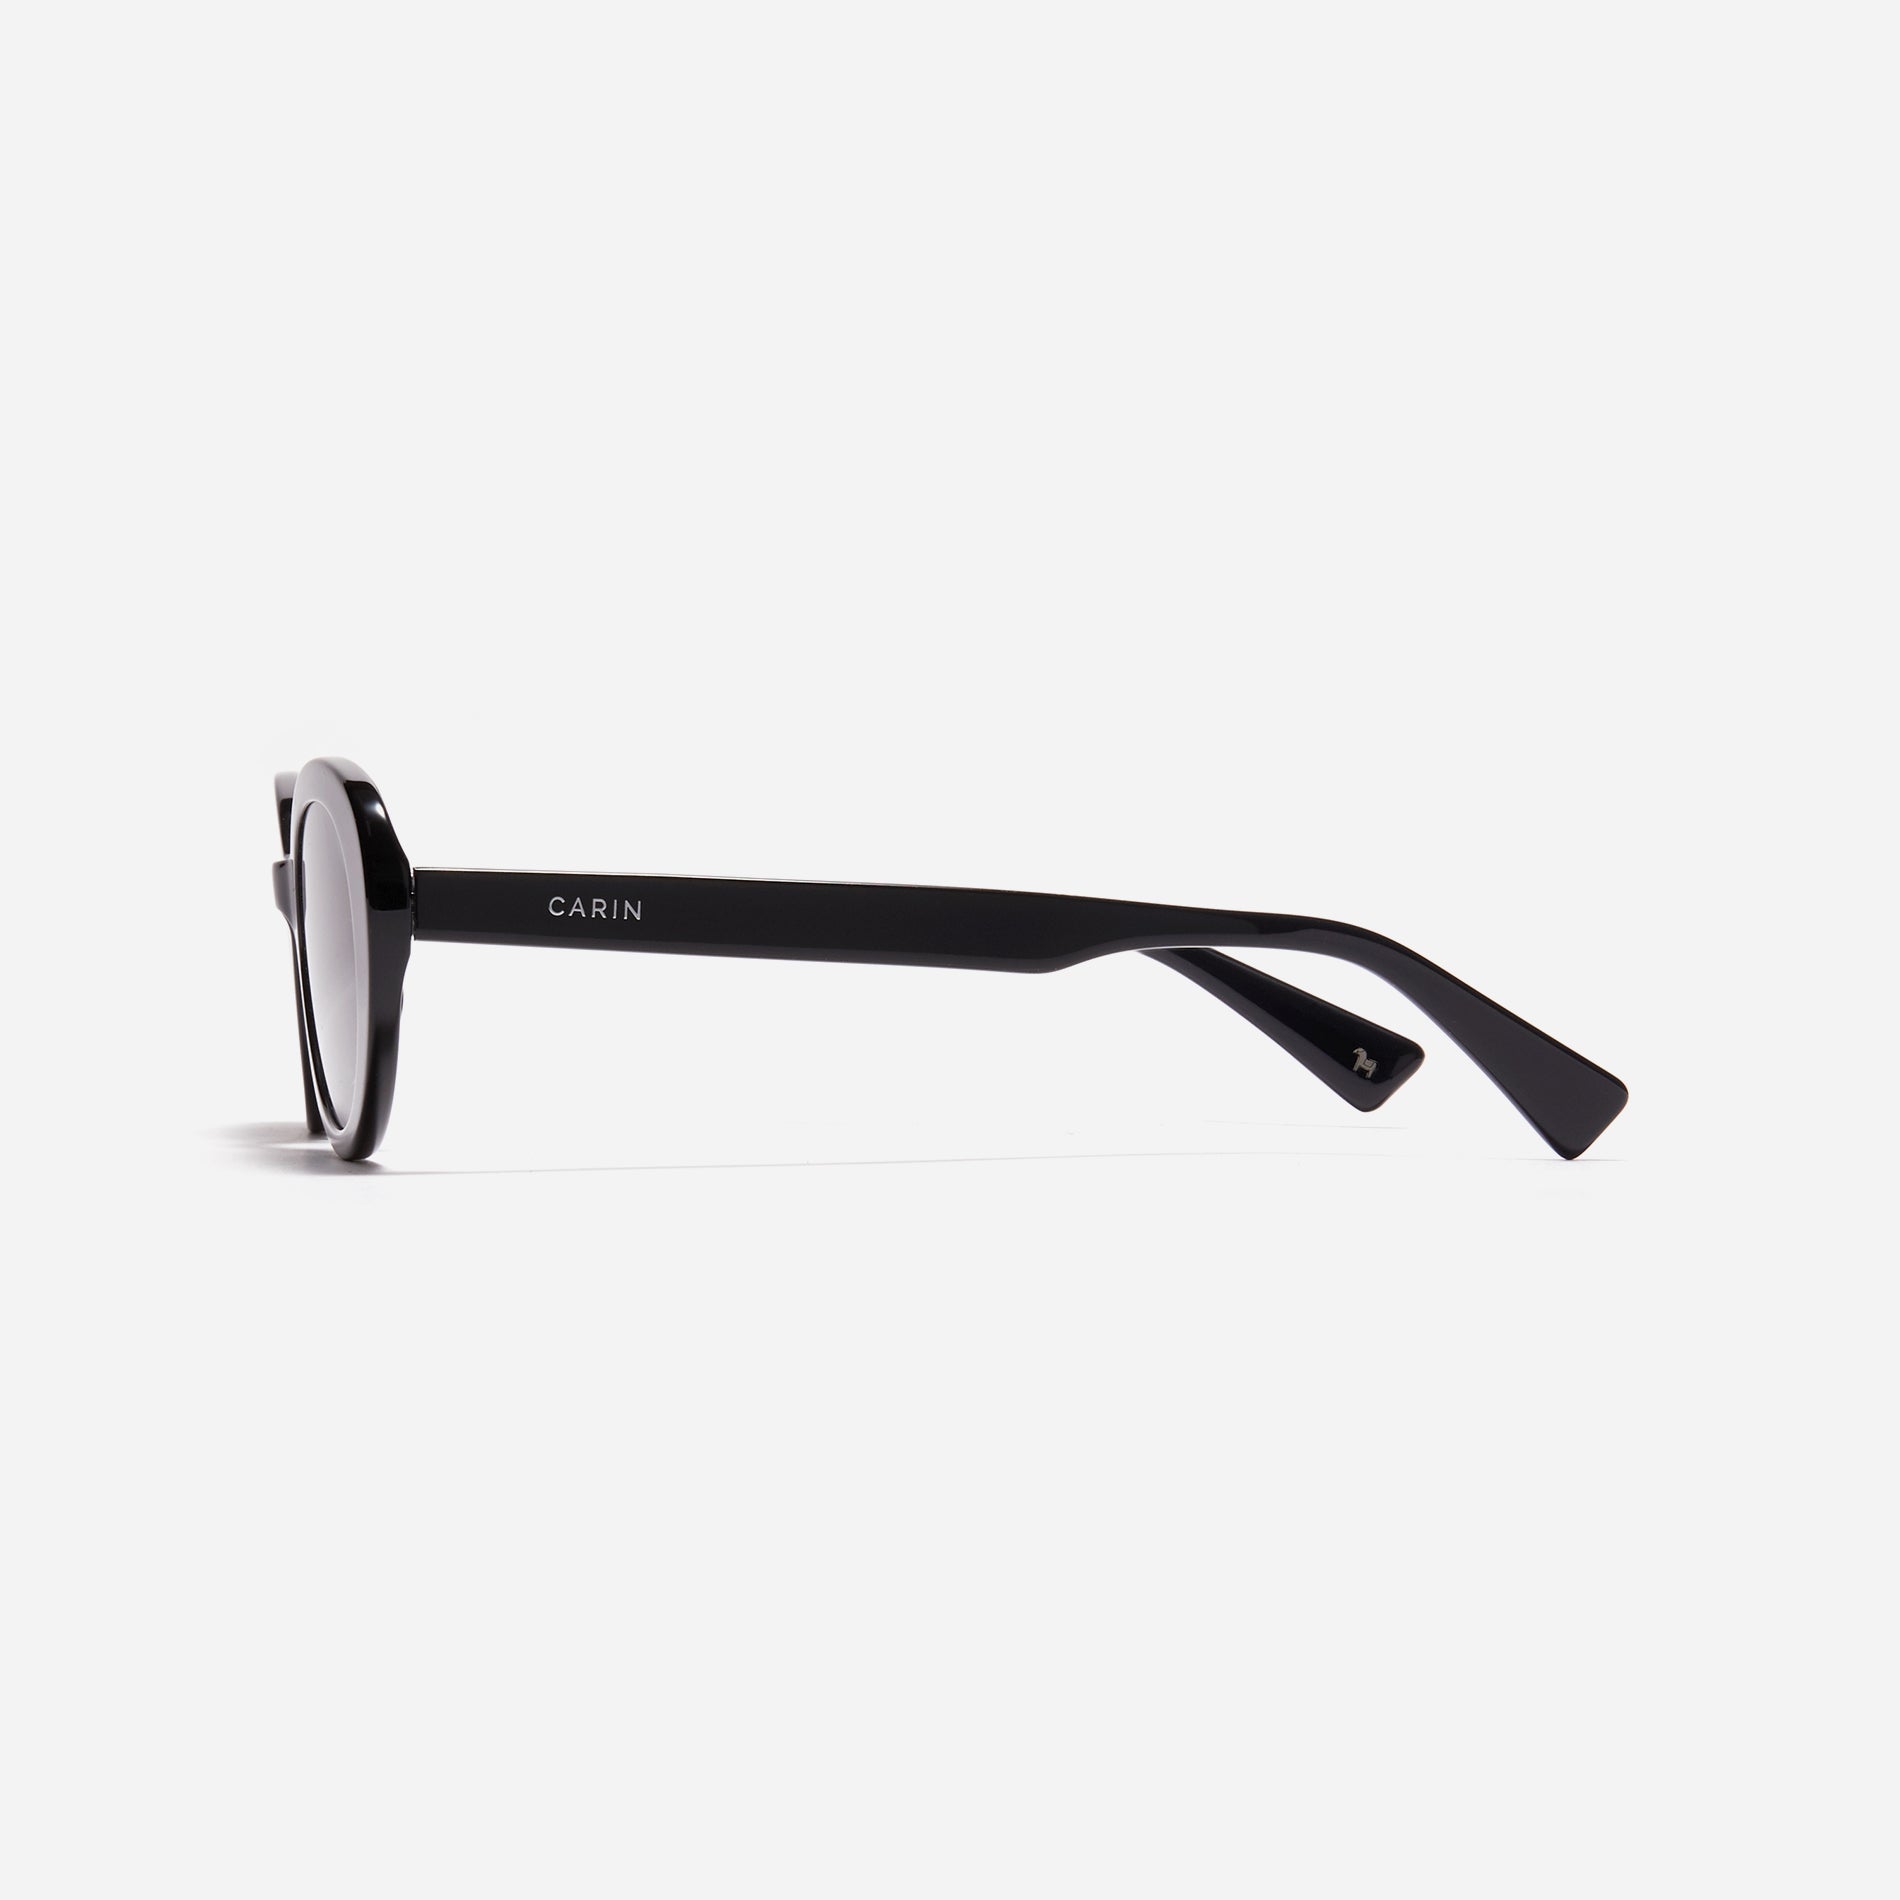 The latest addition to our bestselling CARIN KRISTEN line, boasting an oversized frame for added style. While retaining the fashionable narrow rim design, they have been enhanced to accommodate wider eye widths as well as feature longer temples. Discover the new oversized CARIN KRISTEN R, now available in a wider range of sizes for your perfect fit.